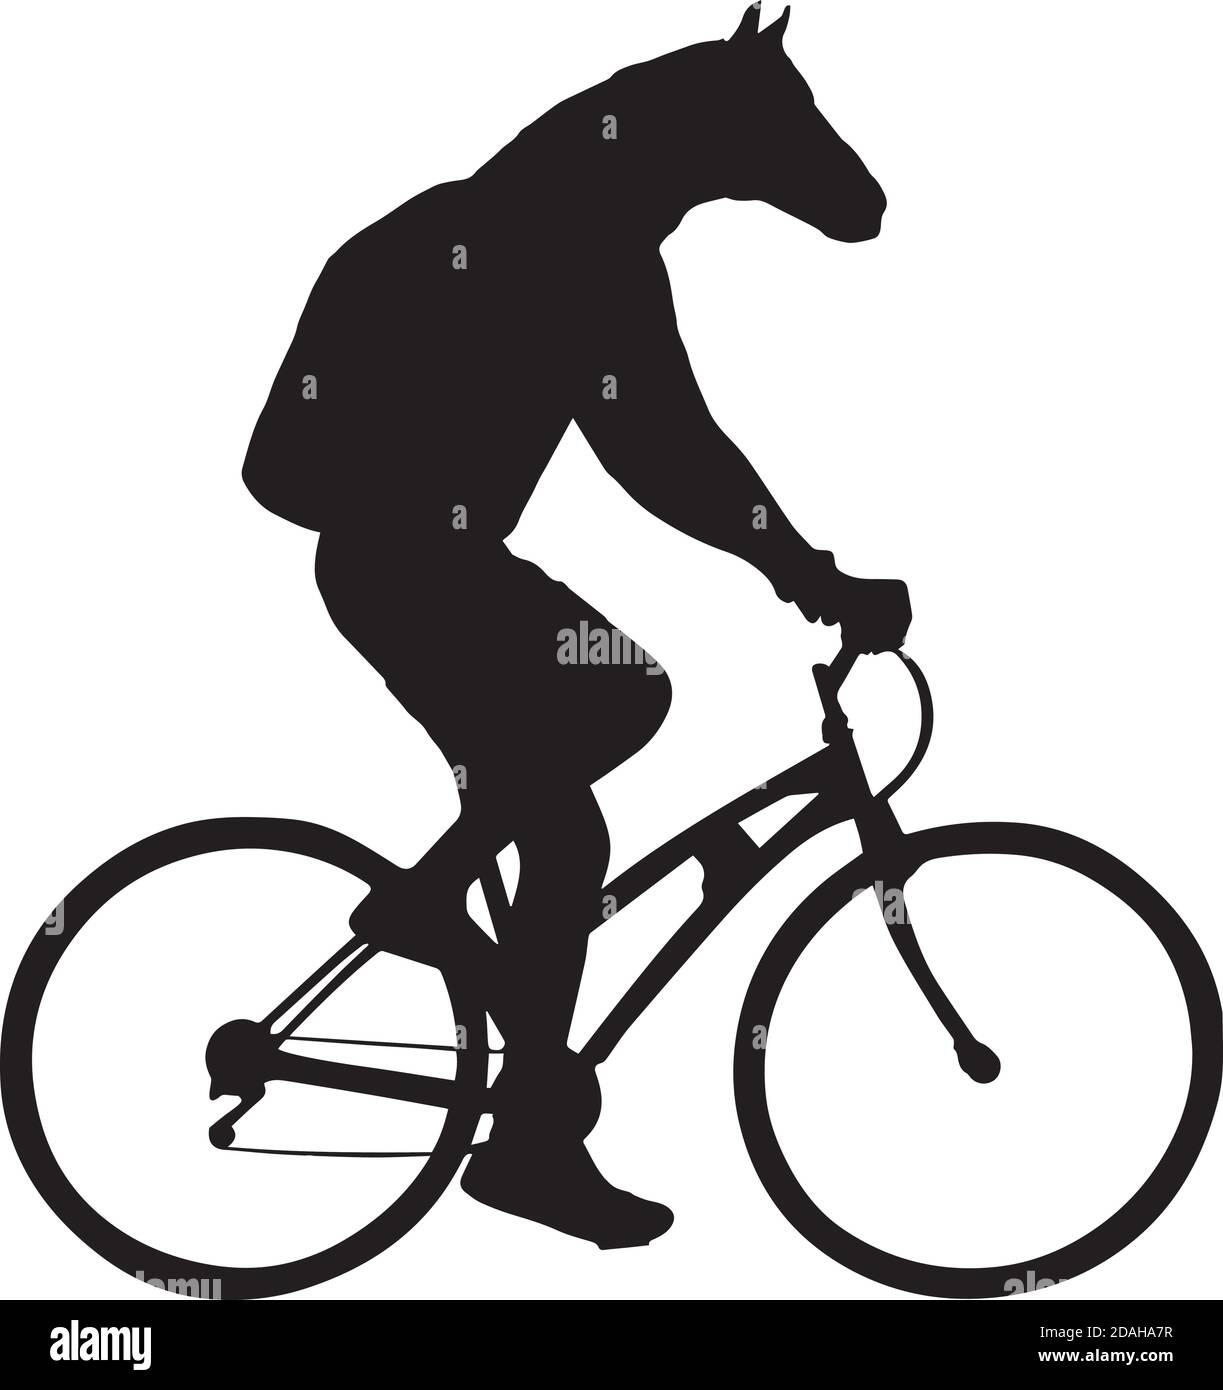 horse head bicyclist riding a bicycle isolated on white background silhouette vector illustration. Stock Vector